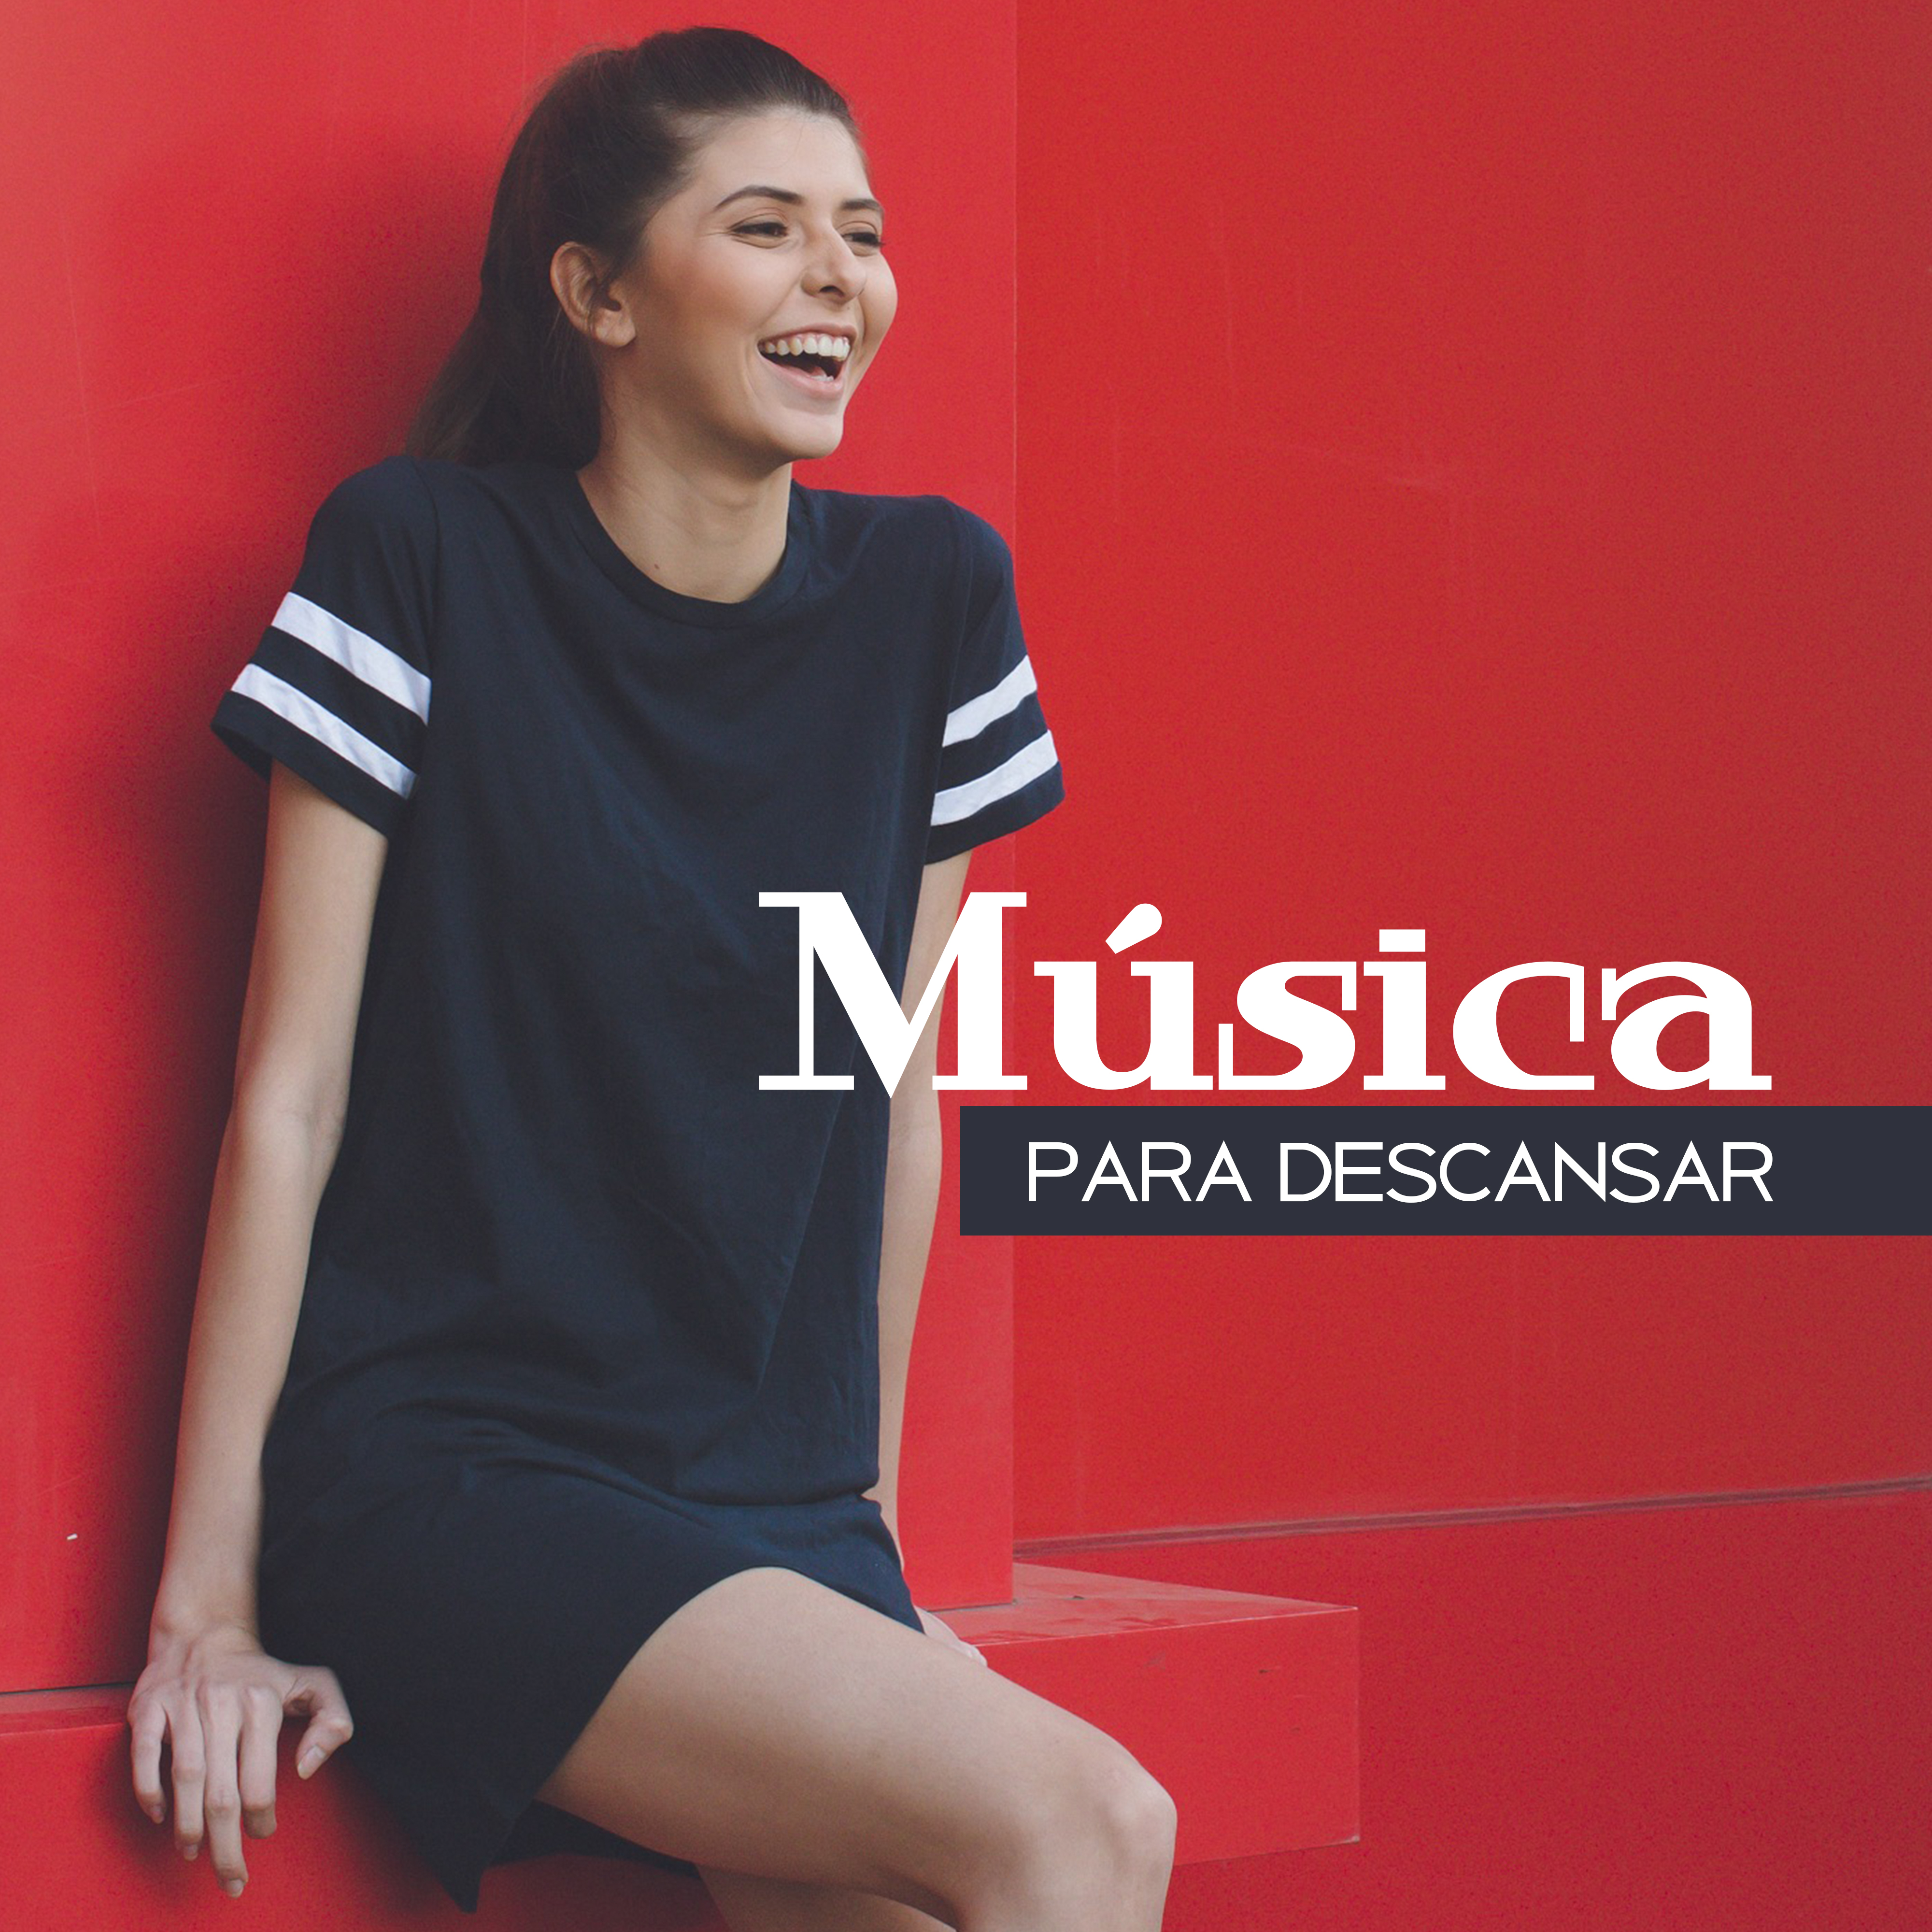 Mu sica para Descansar  New Age Music, Pure Relaxation, Relief Stress, Rest, Spanish Melodies